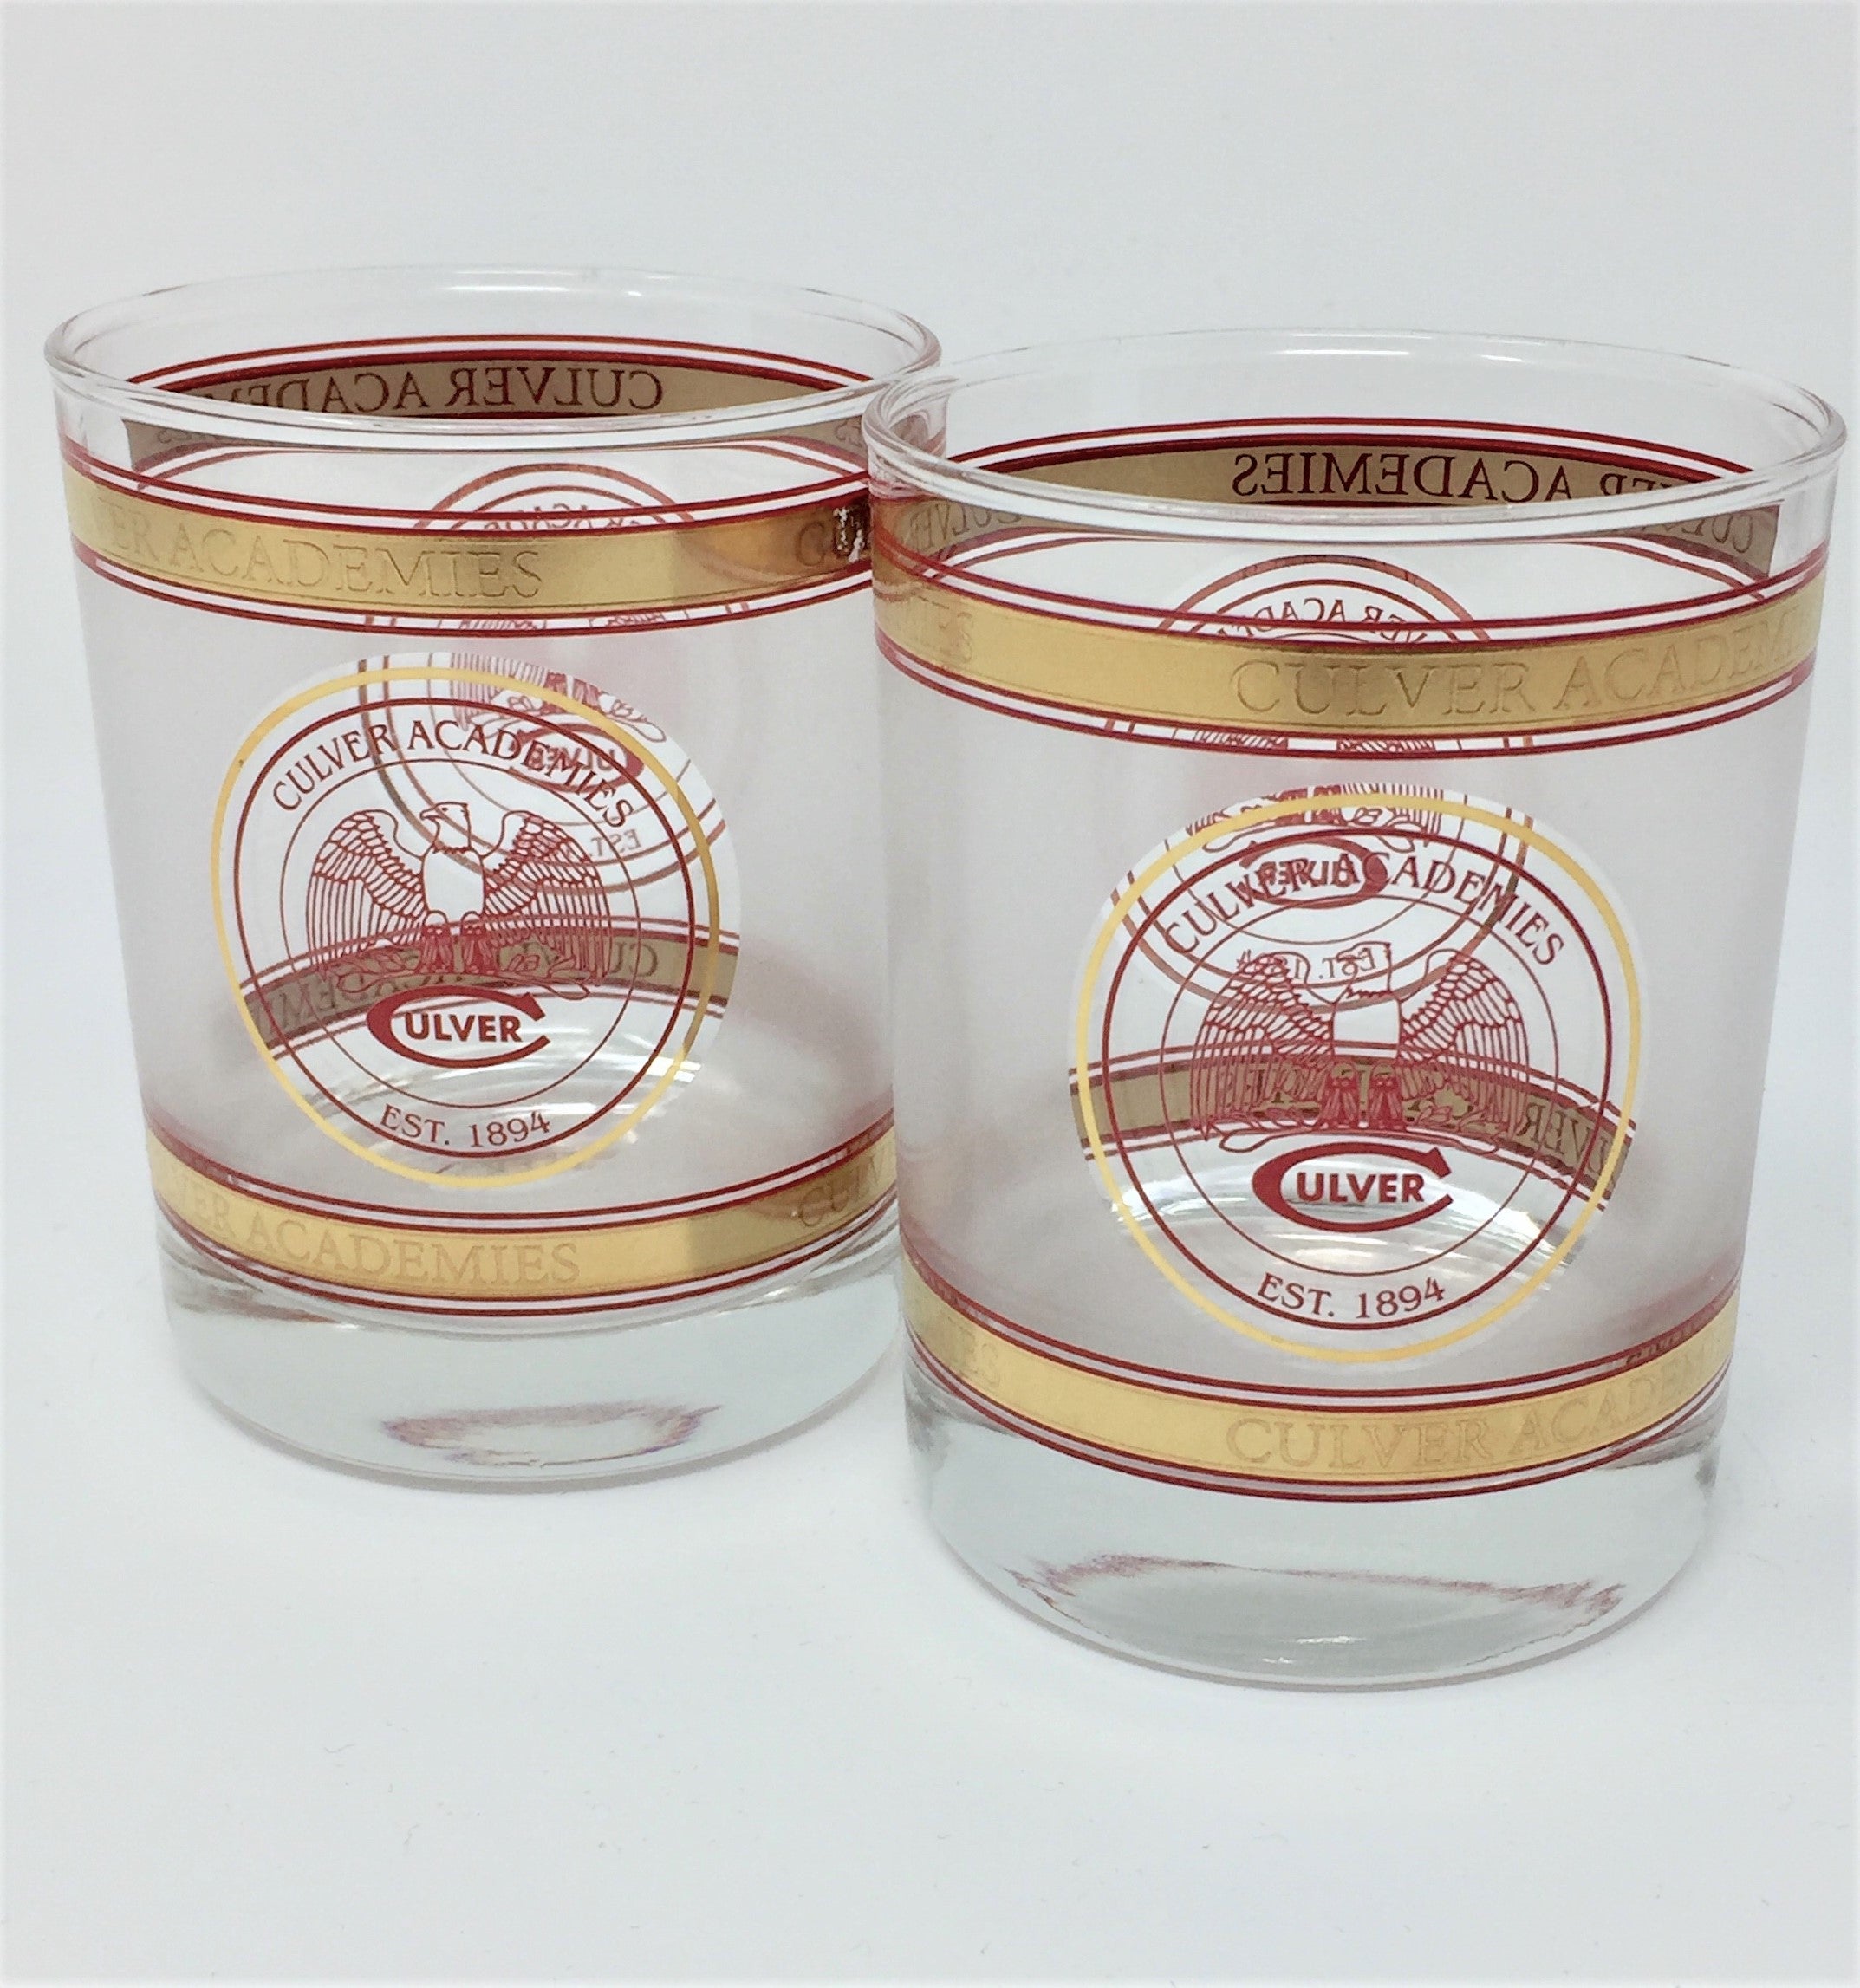 Culver Academies Frosted Rocks Glass - Set of 2 -15oz